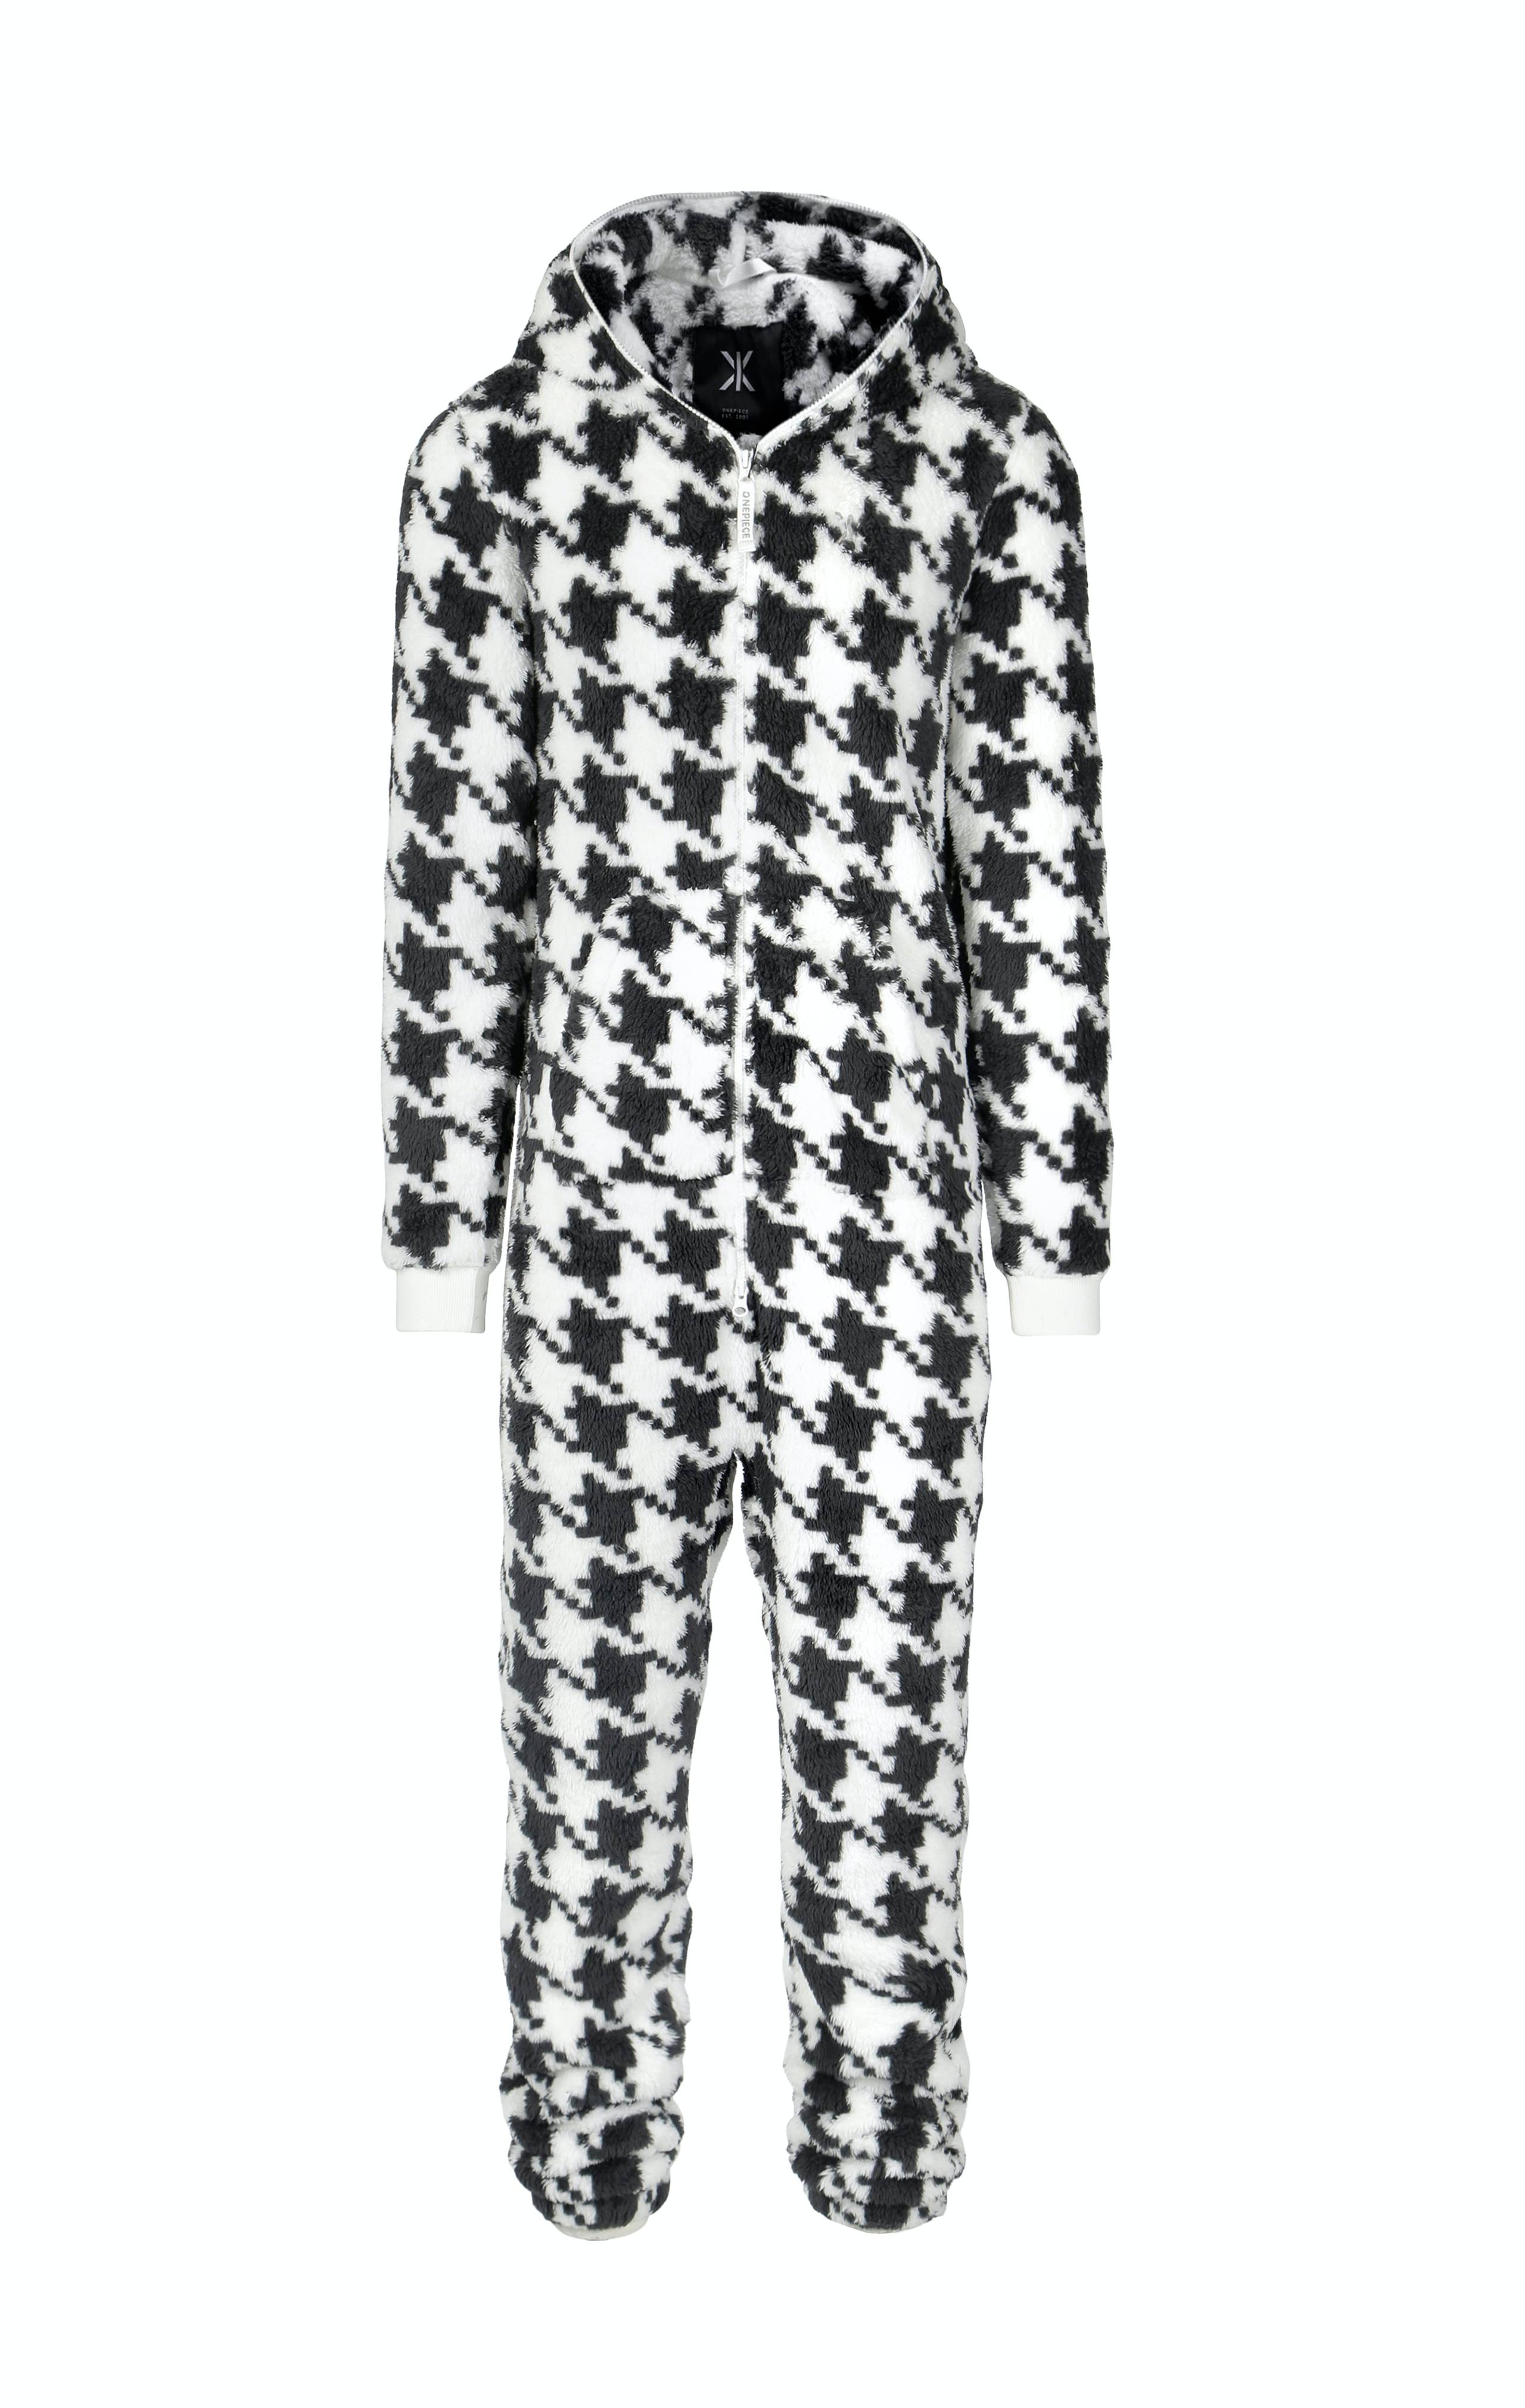 Onepiece The New Puppy Jumpsuit Houndsthooth - 1